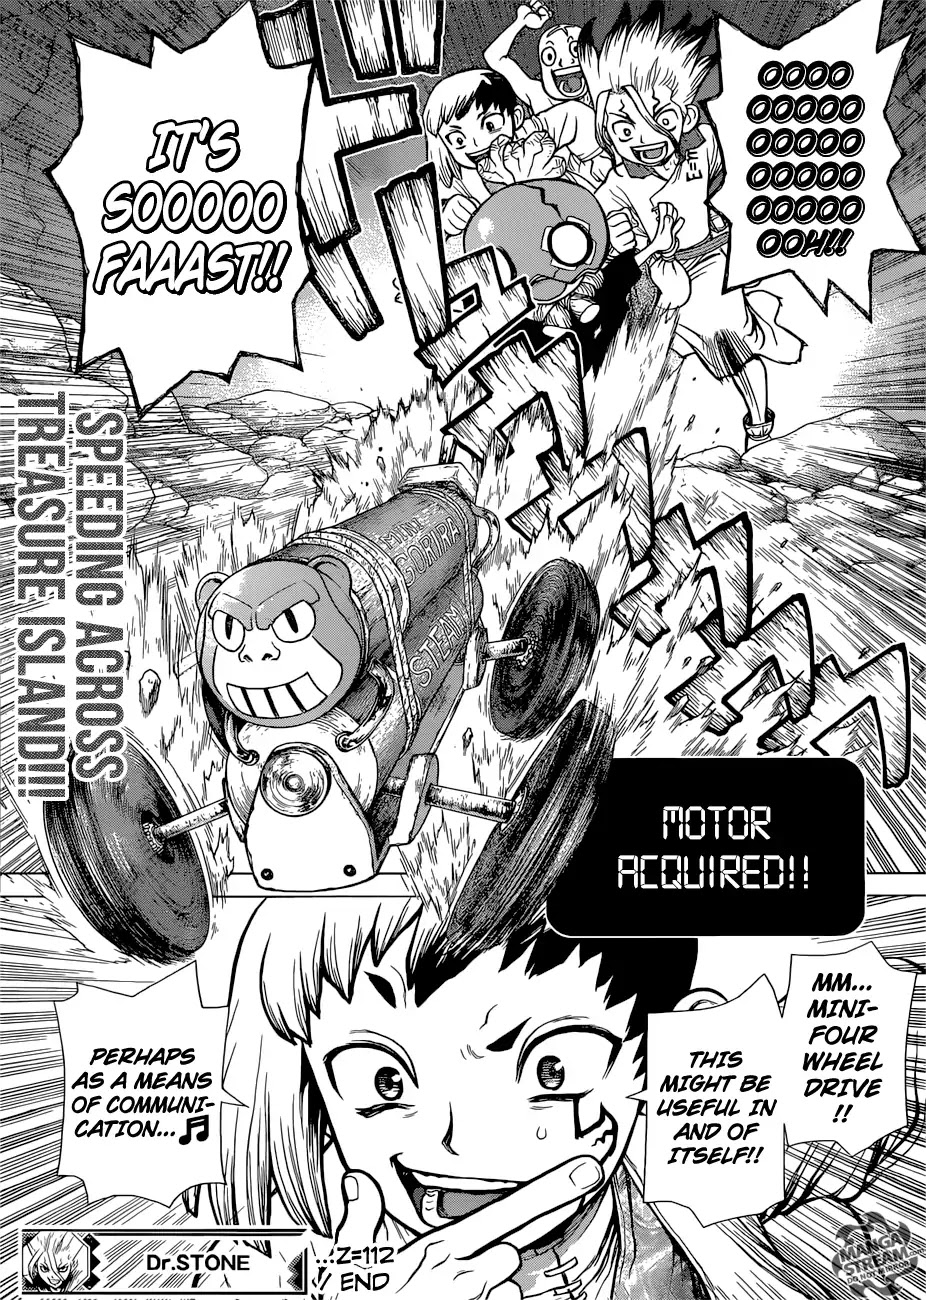 Dr.Stone, Chapter 112 3-D Champion image 19